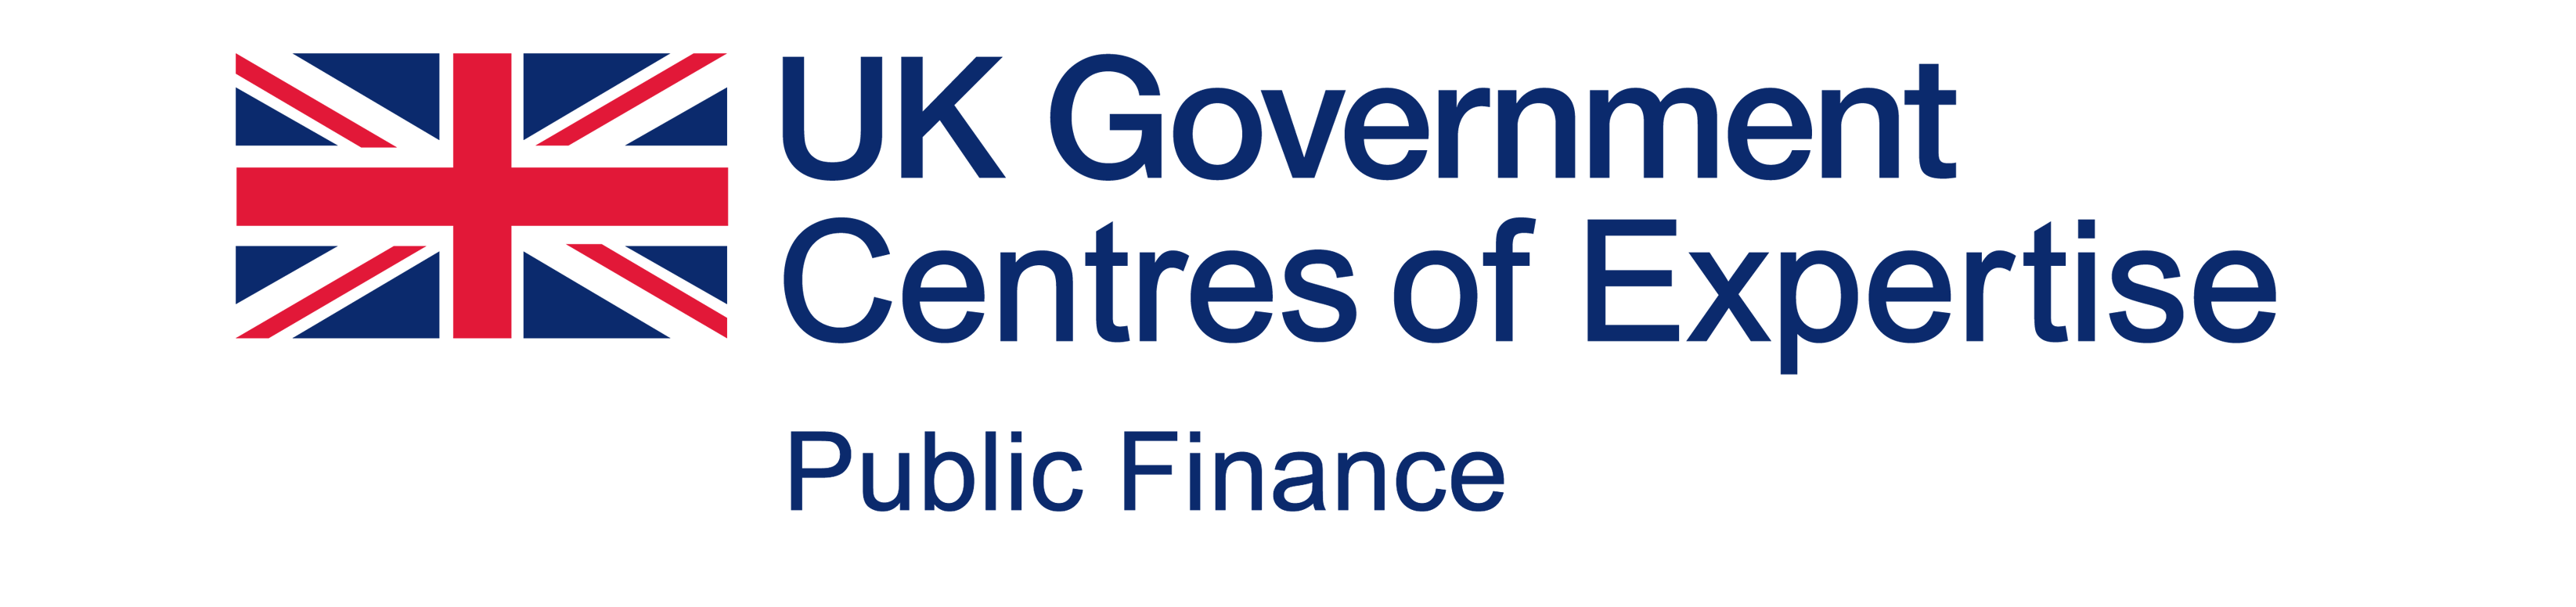 UK Government Centres of Expertise - Public Finance